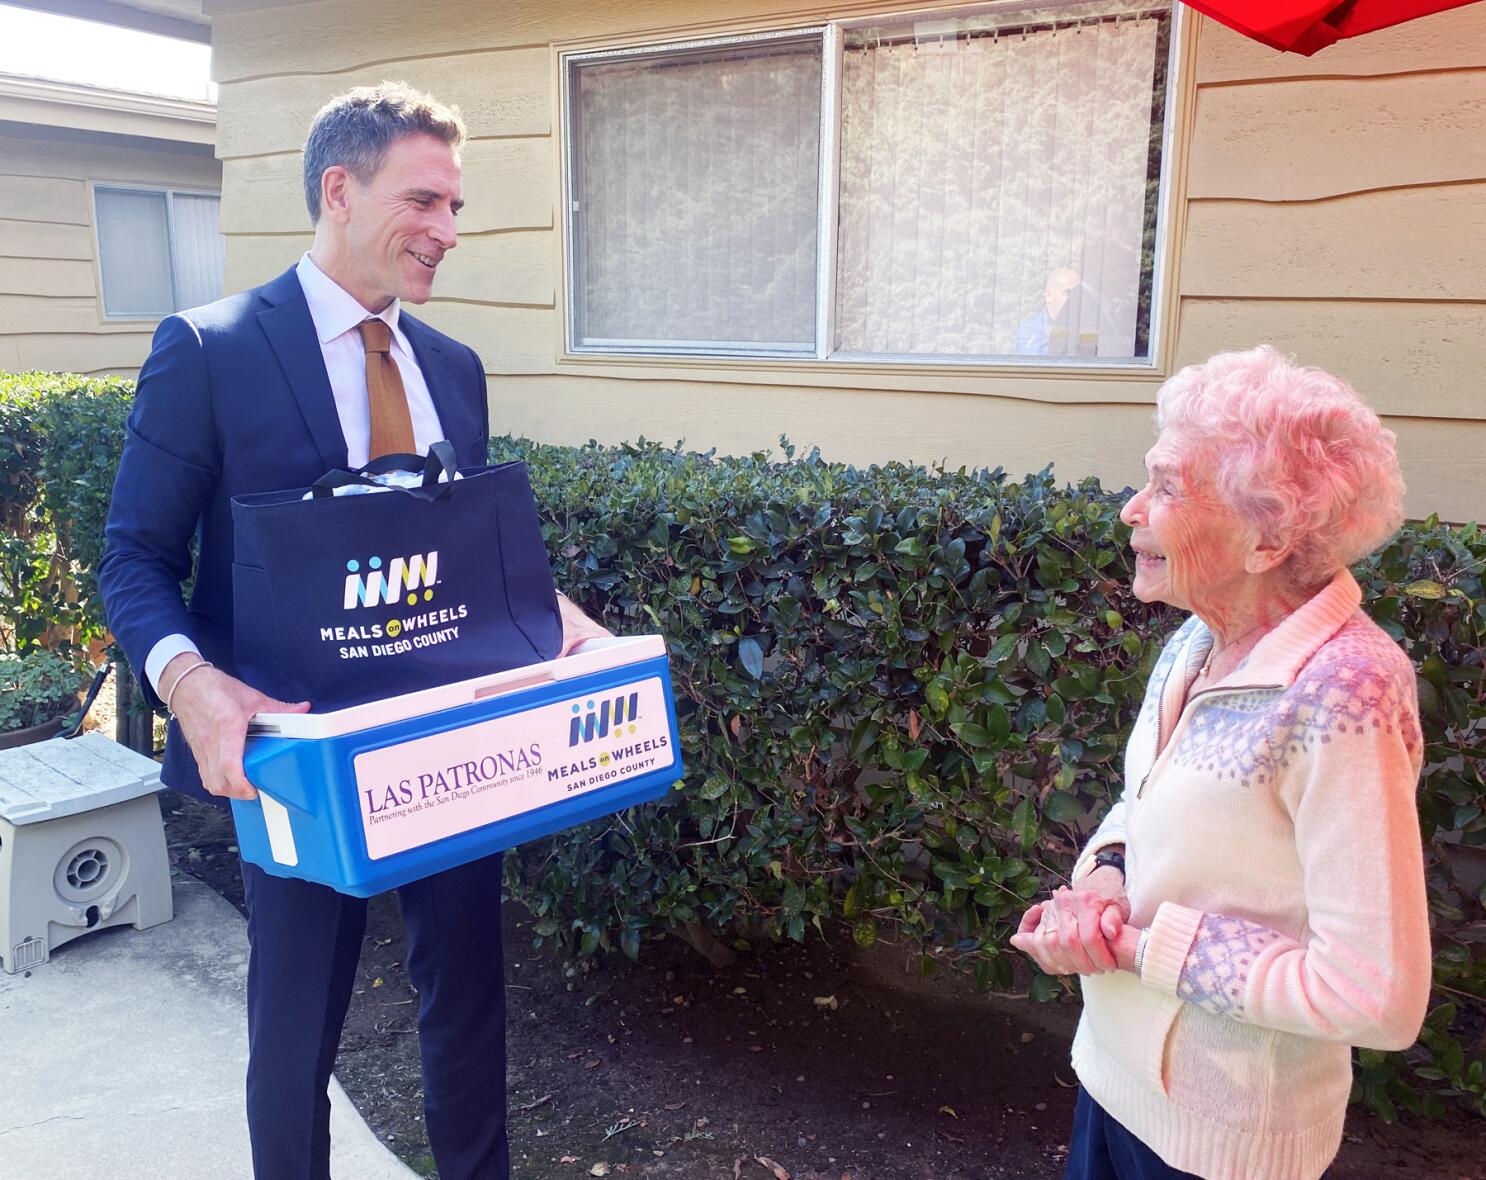 San Diego neighbors surprise 104-year-old veteran with drive-by